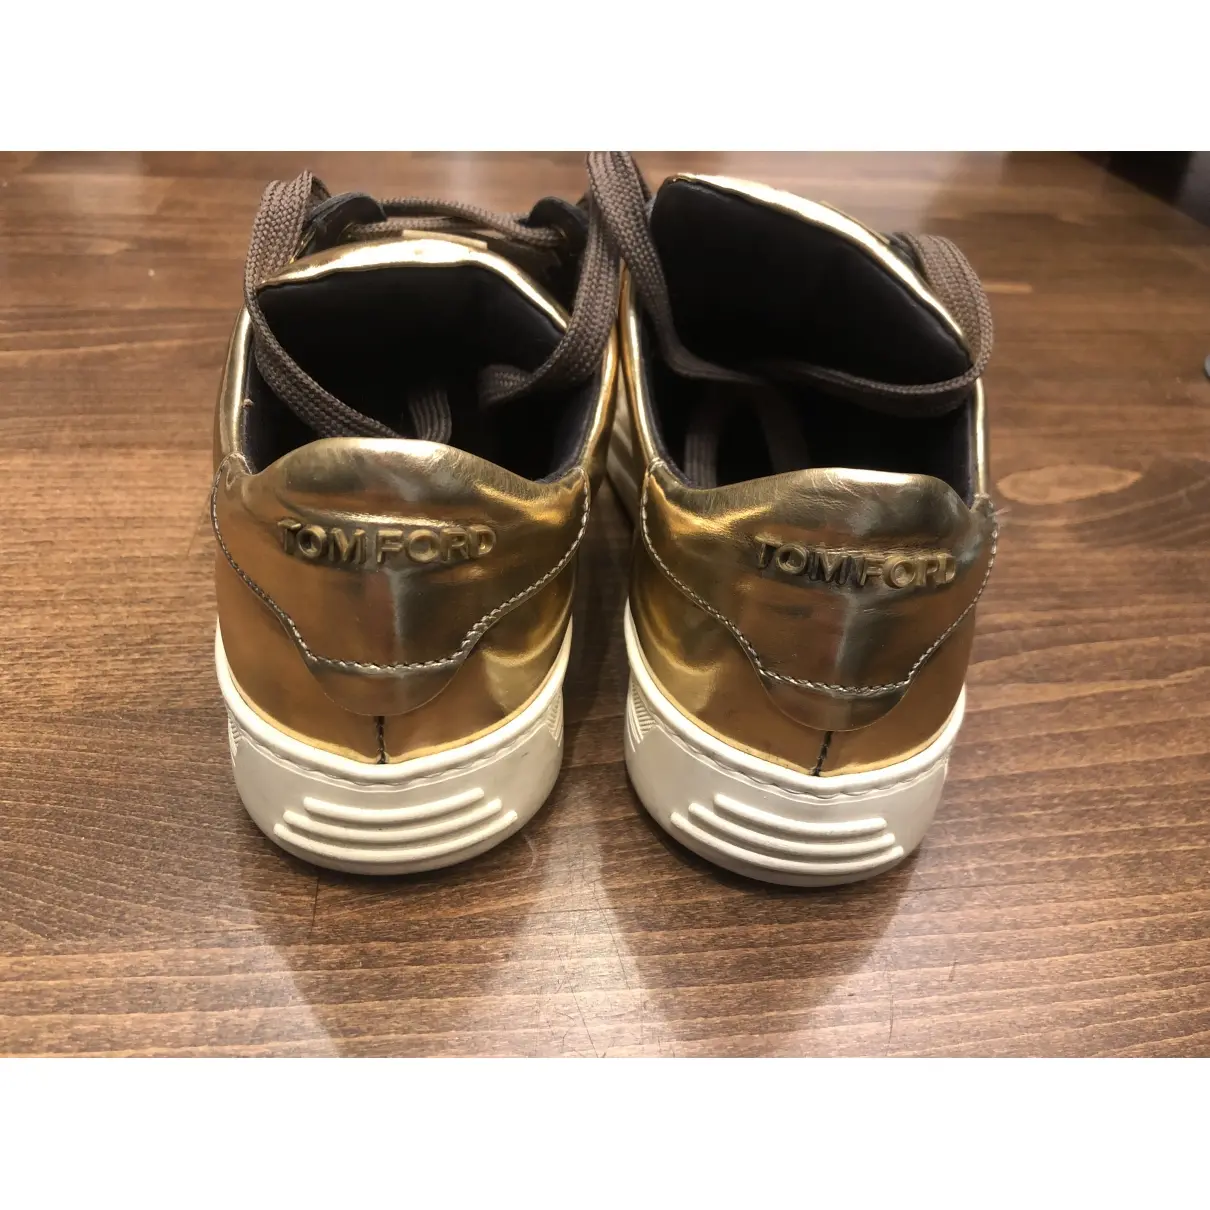 Buy Tom Ford Patent leather trainers online